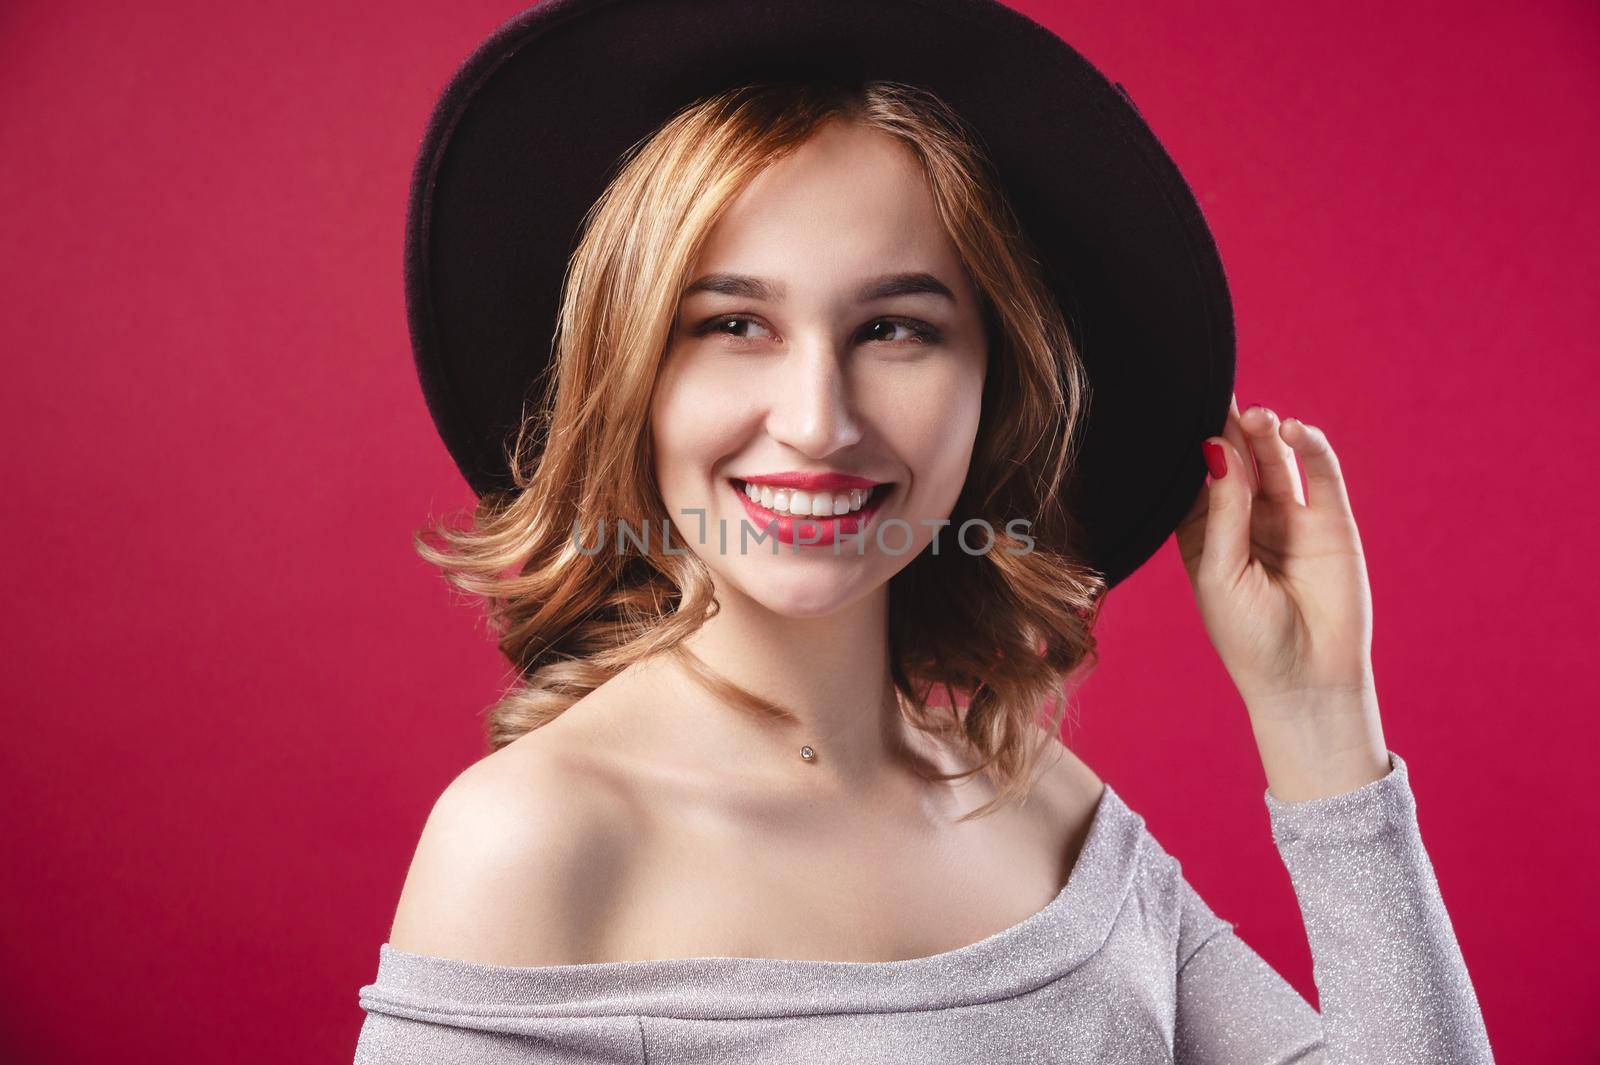 Fashionable attractive Caucasian girl in a large hat to large brim in a silver shiny dress on a red background. Studio retro portrait of a smiling young woman.